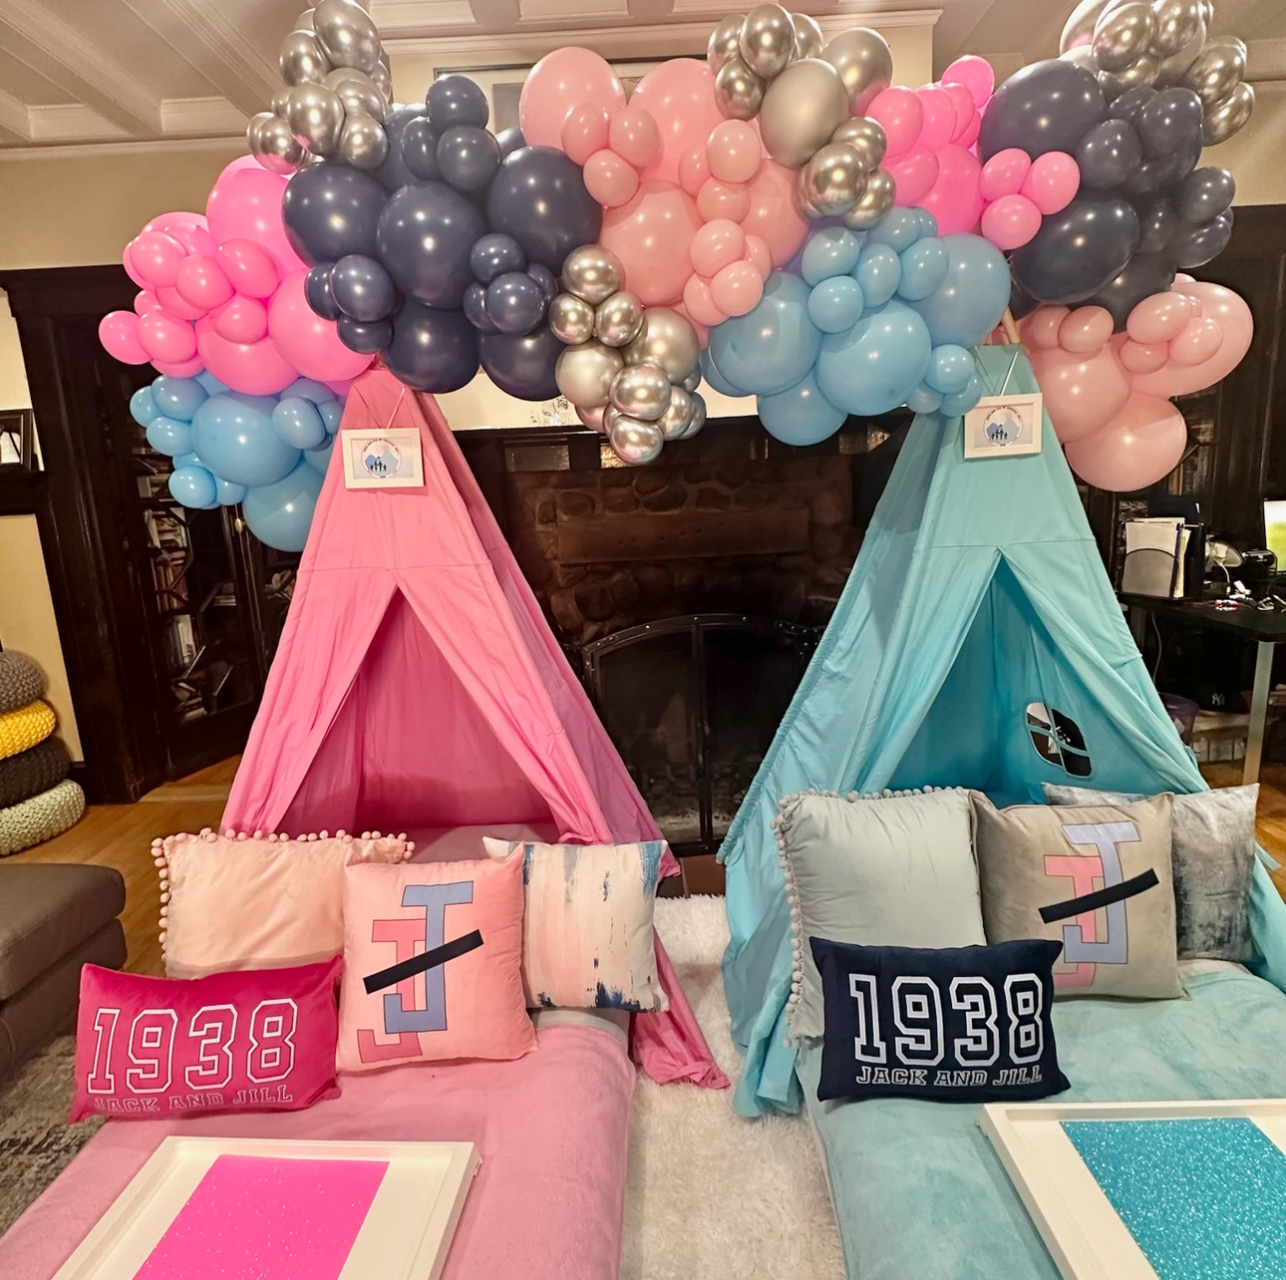 jack and jill pink and blue dreams party theme